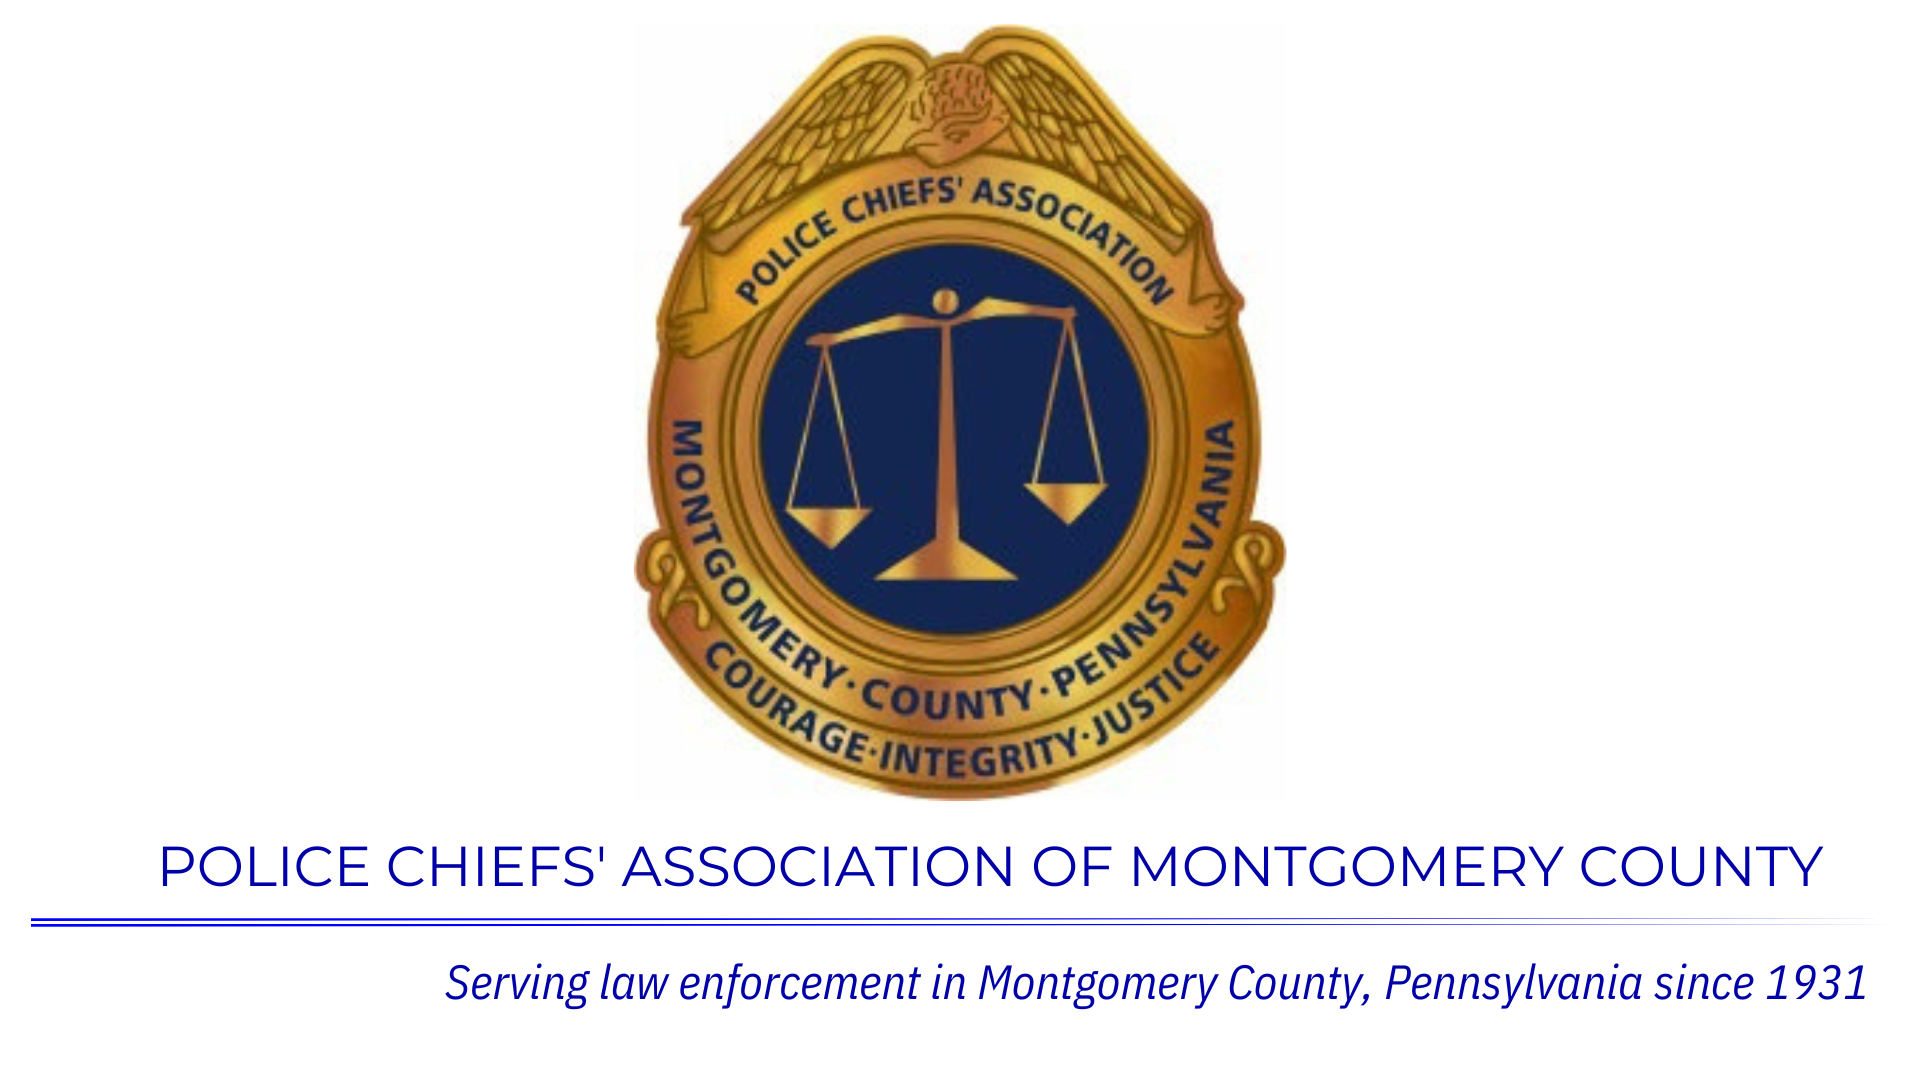 POLICE CHIEFS' ASSOCIATION OF MONTGOMERY COUNTY